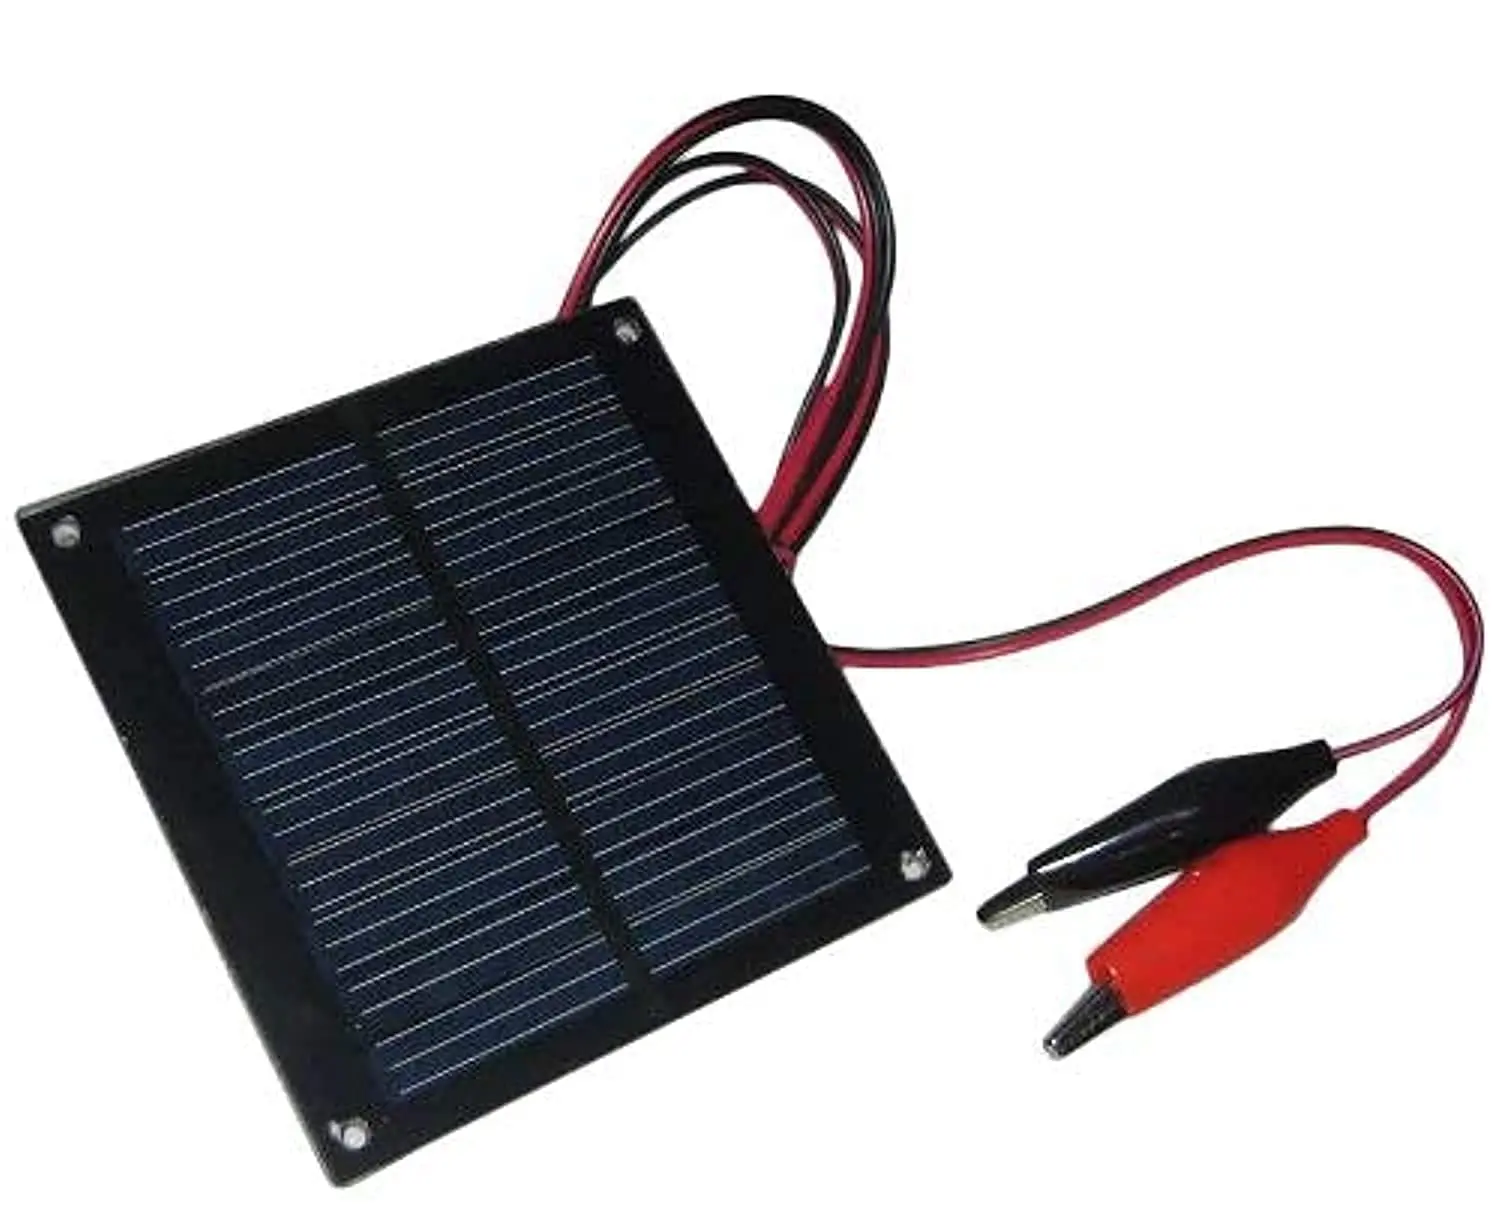 small solar panels - What can a small solar panel power